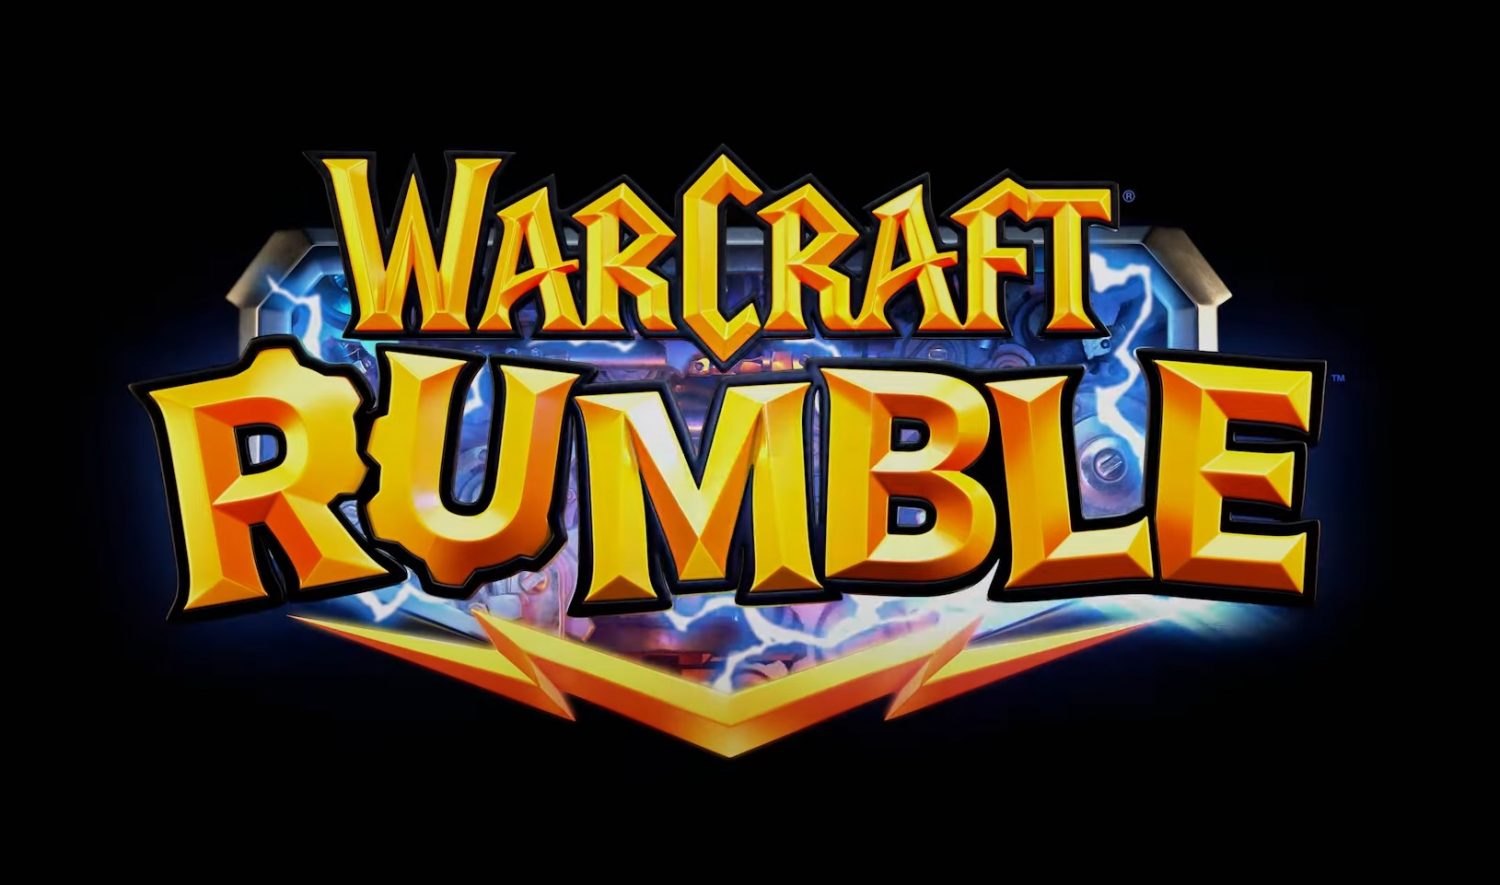 warcraft rumble come gioca